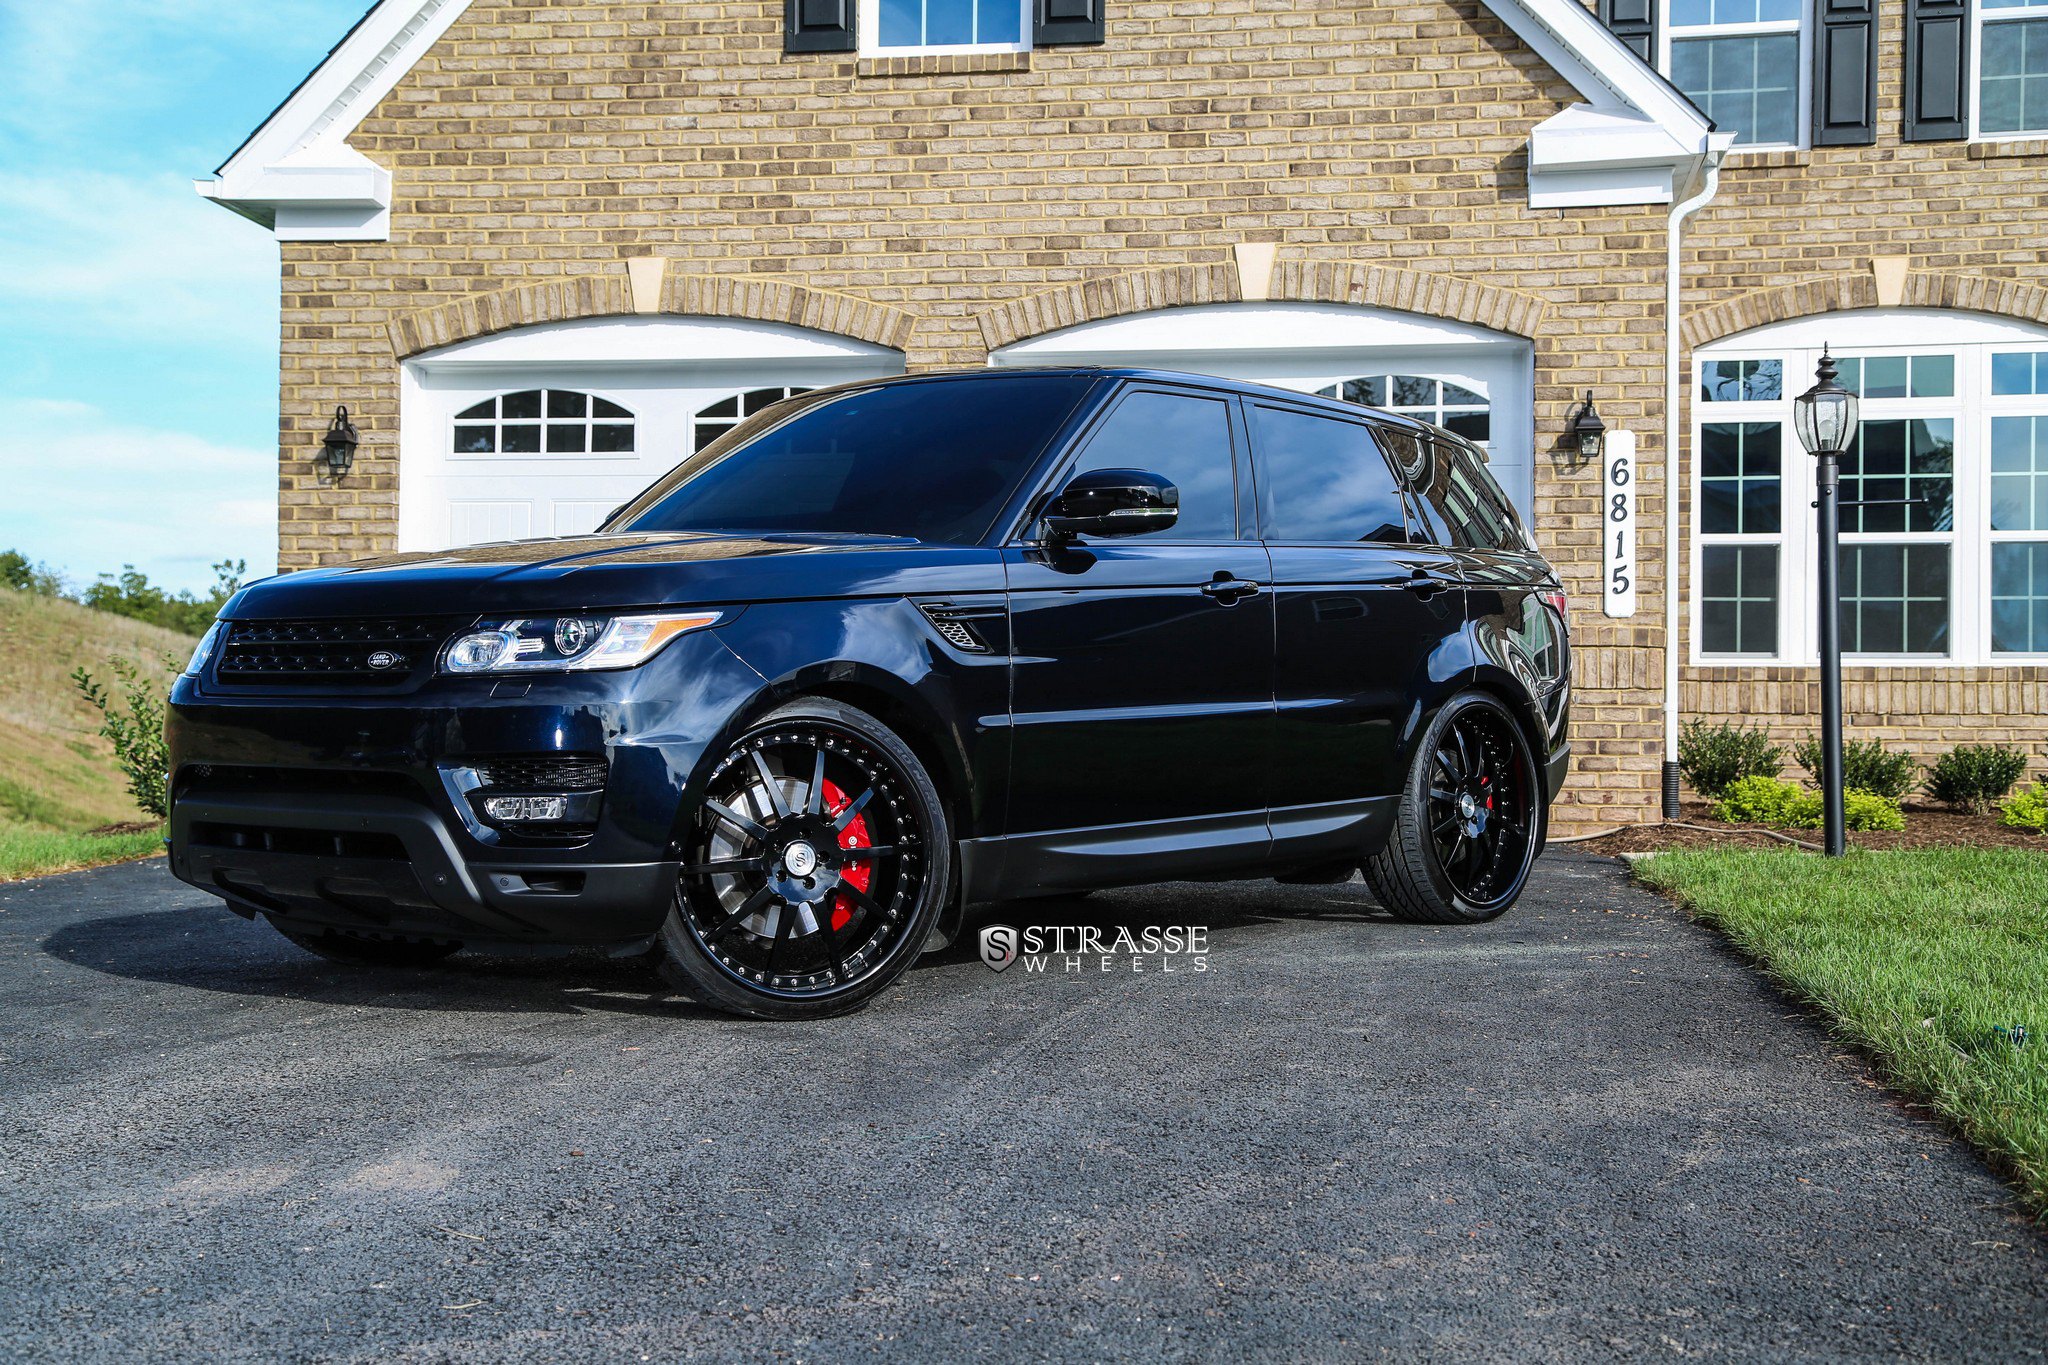 Aftermarket Bumper Guard on Black Range Rover Sport - Photo by Strasse Forged